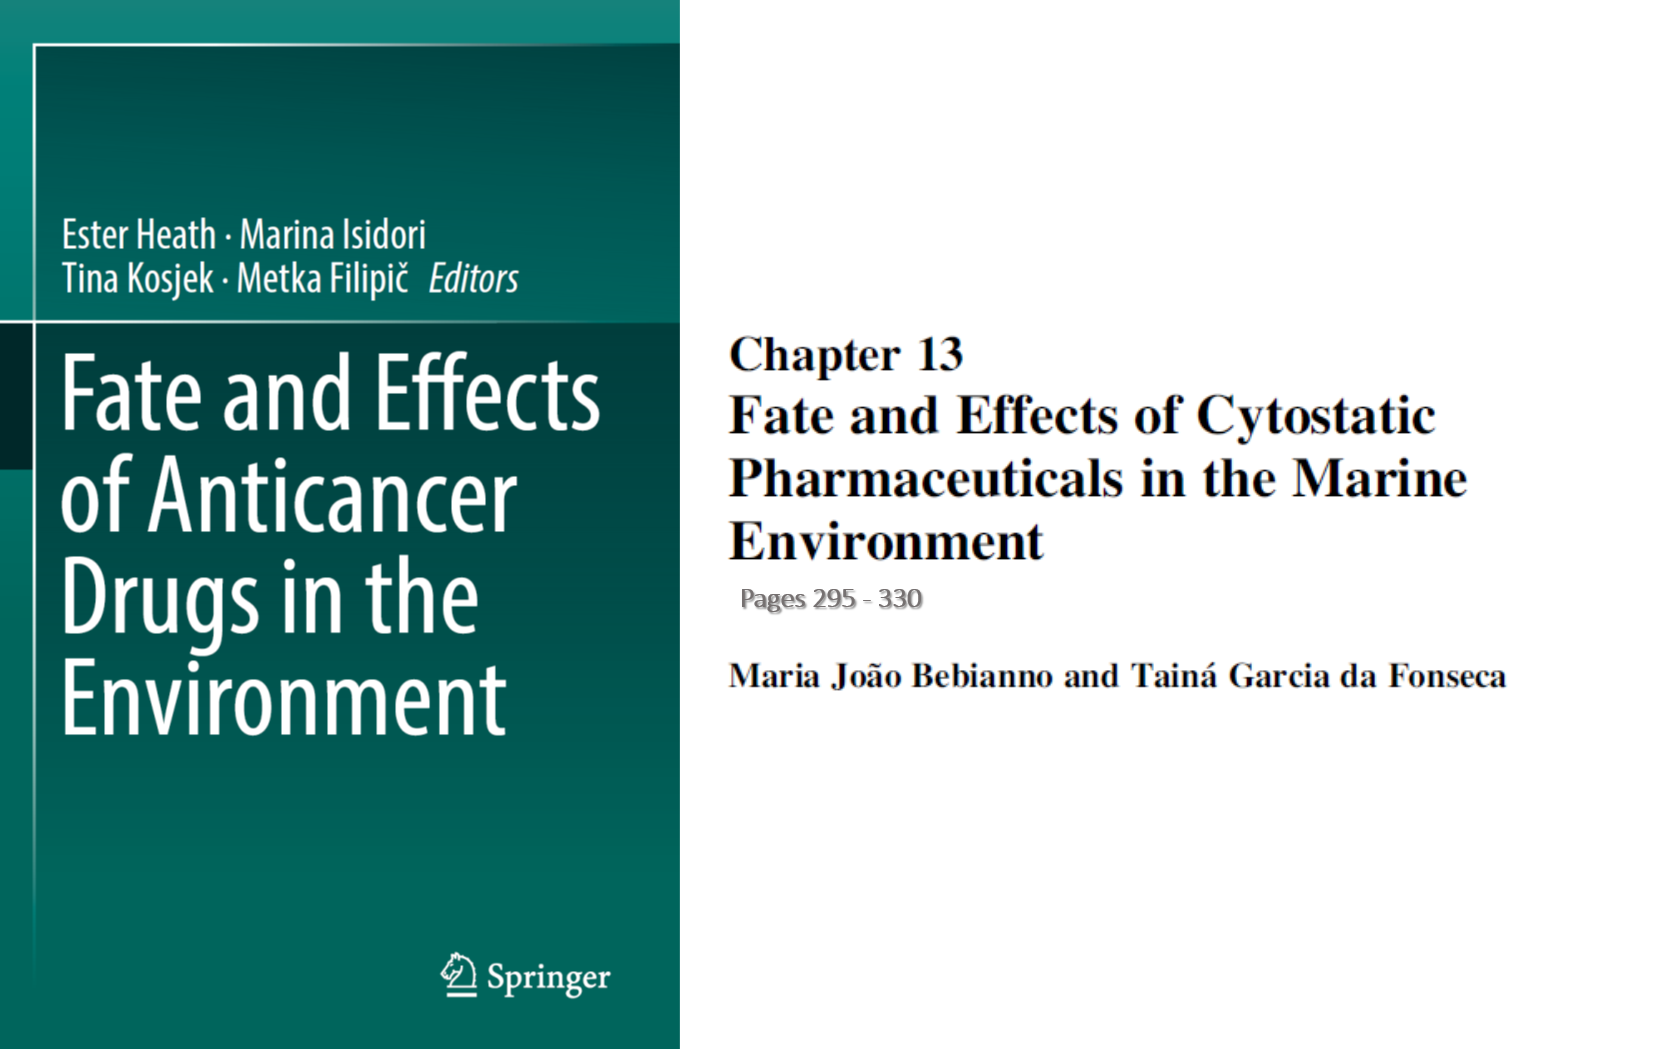 Fate and Effects of Cytostatic Pharmaceuticals in the Marine Environment